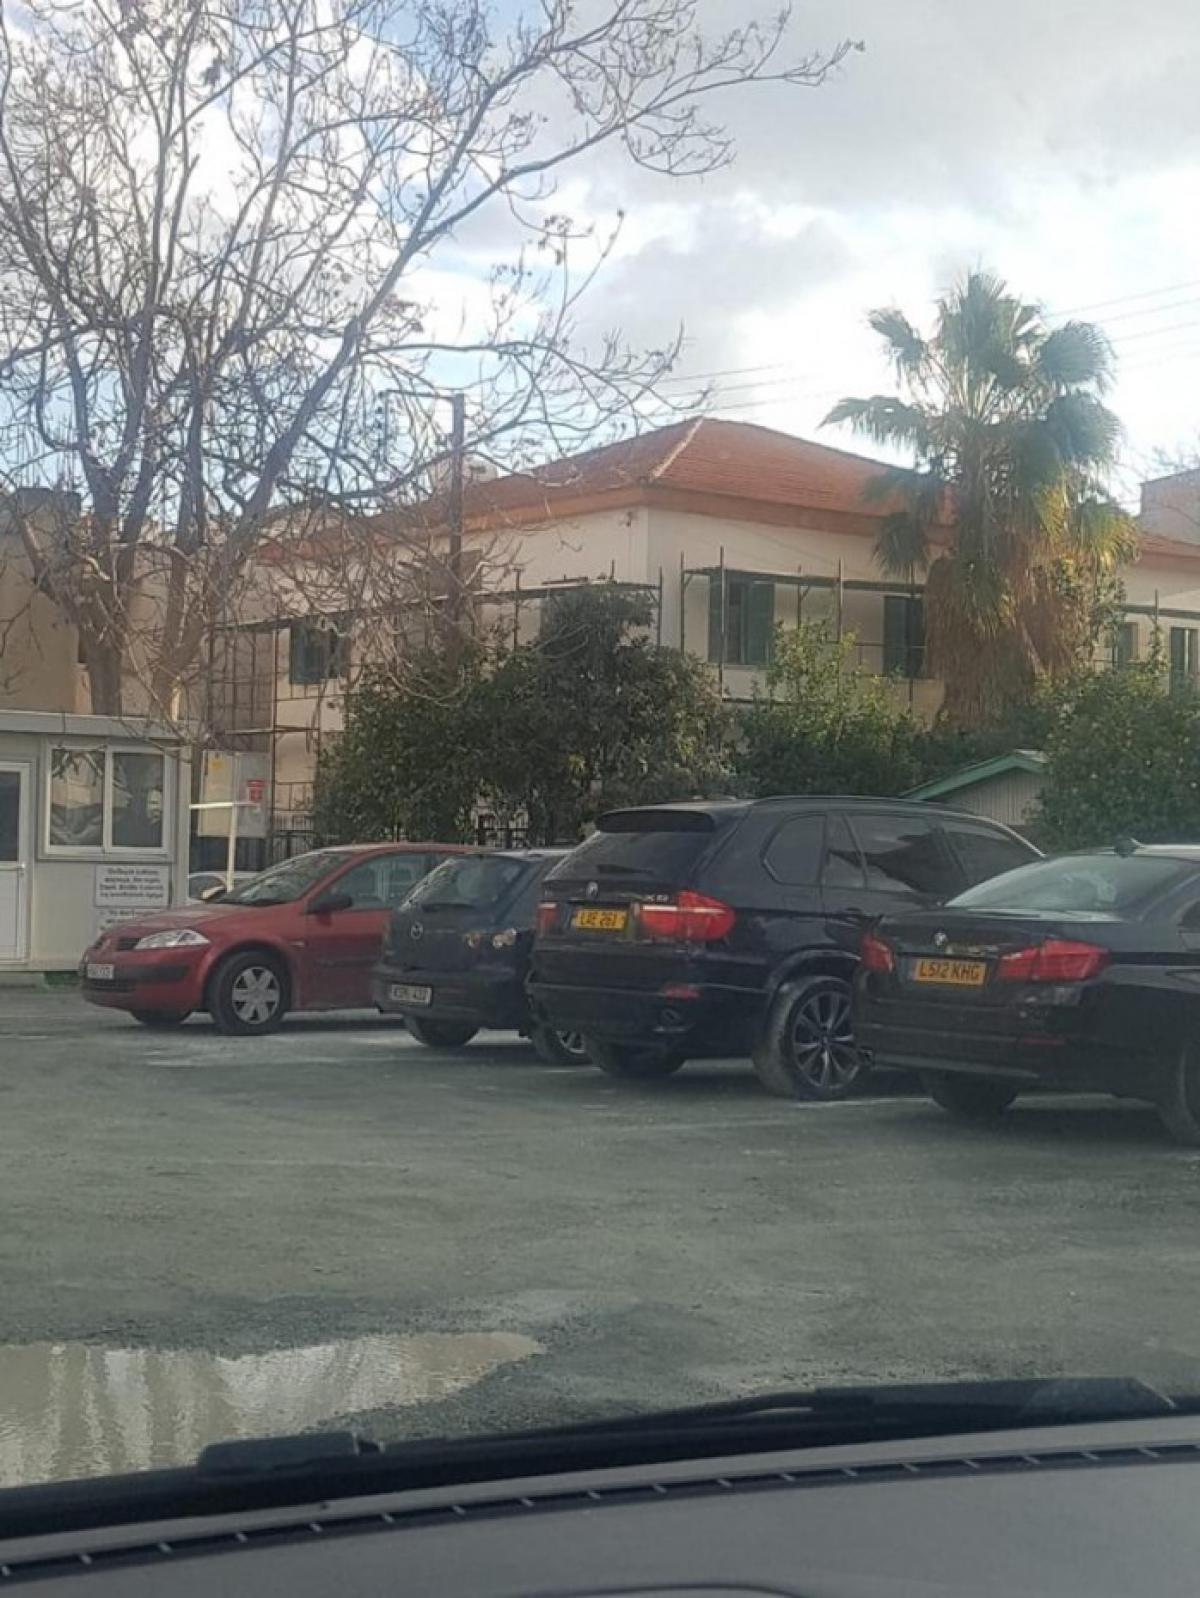 Picture of Home For Sale in City Centre, Other, Cyprus